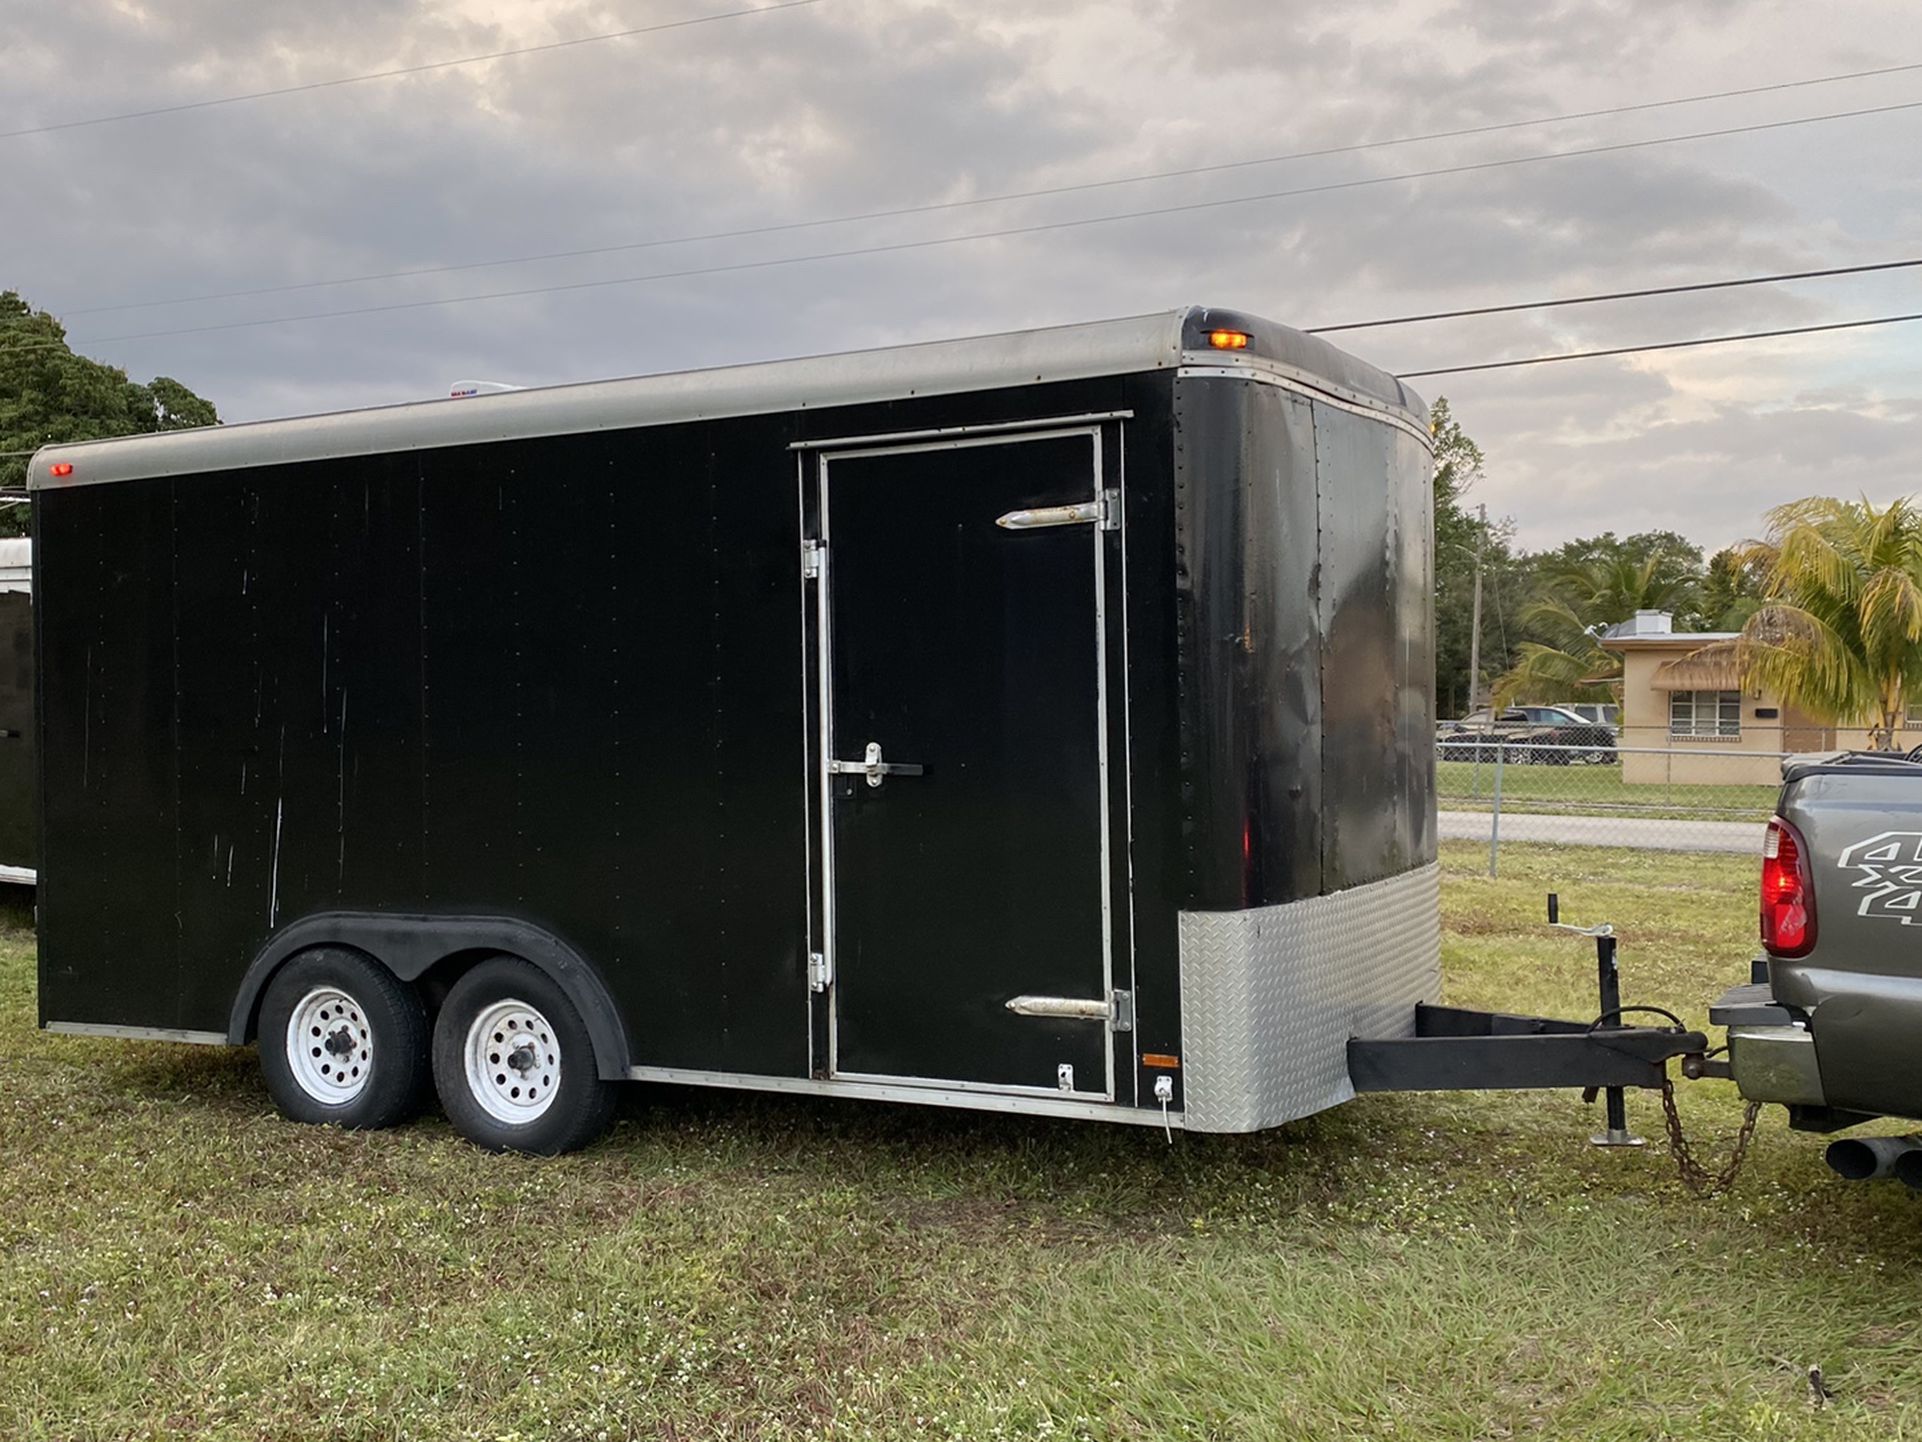 7 X 16 Extra Tall Enclosed Landsape /Cargo Trailer With Ramp Clean Title $4500.00 Firm No Offers